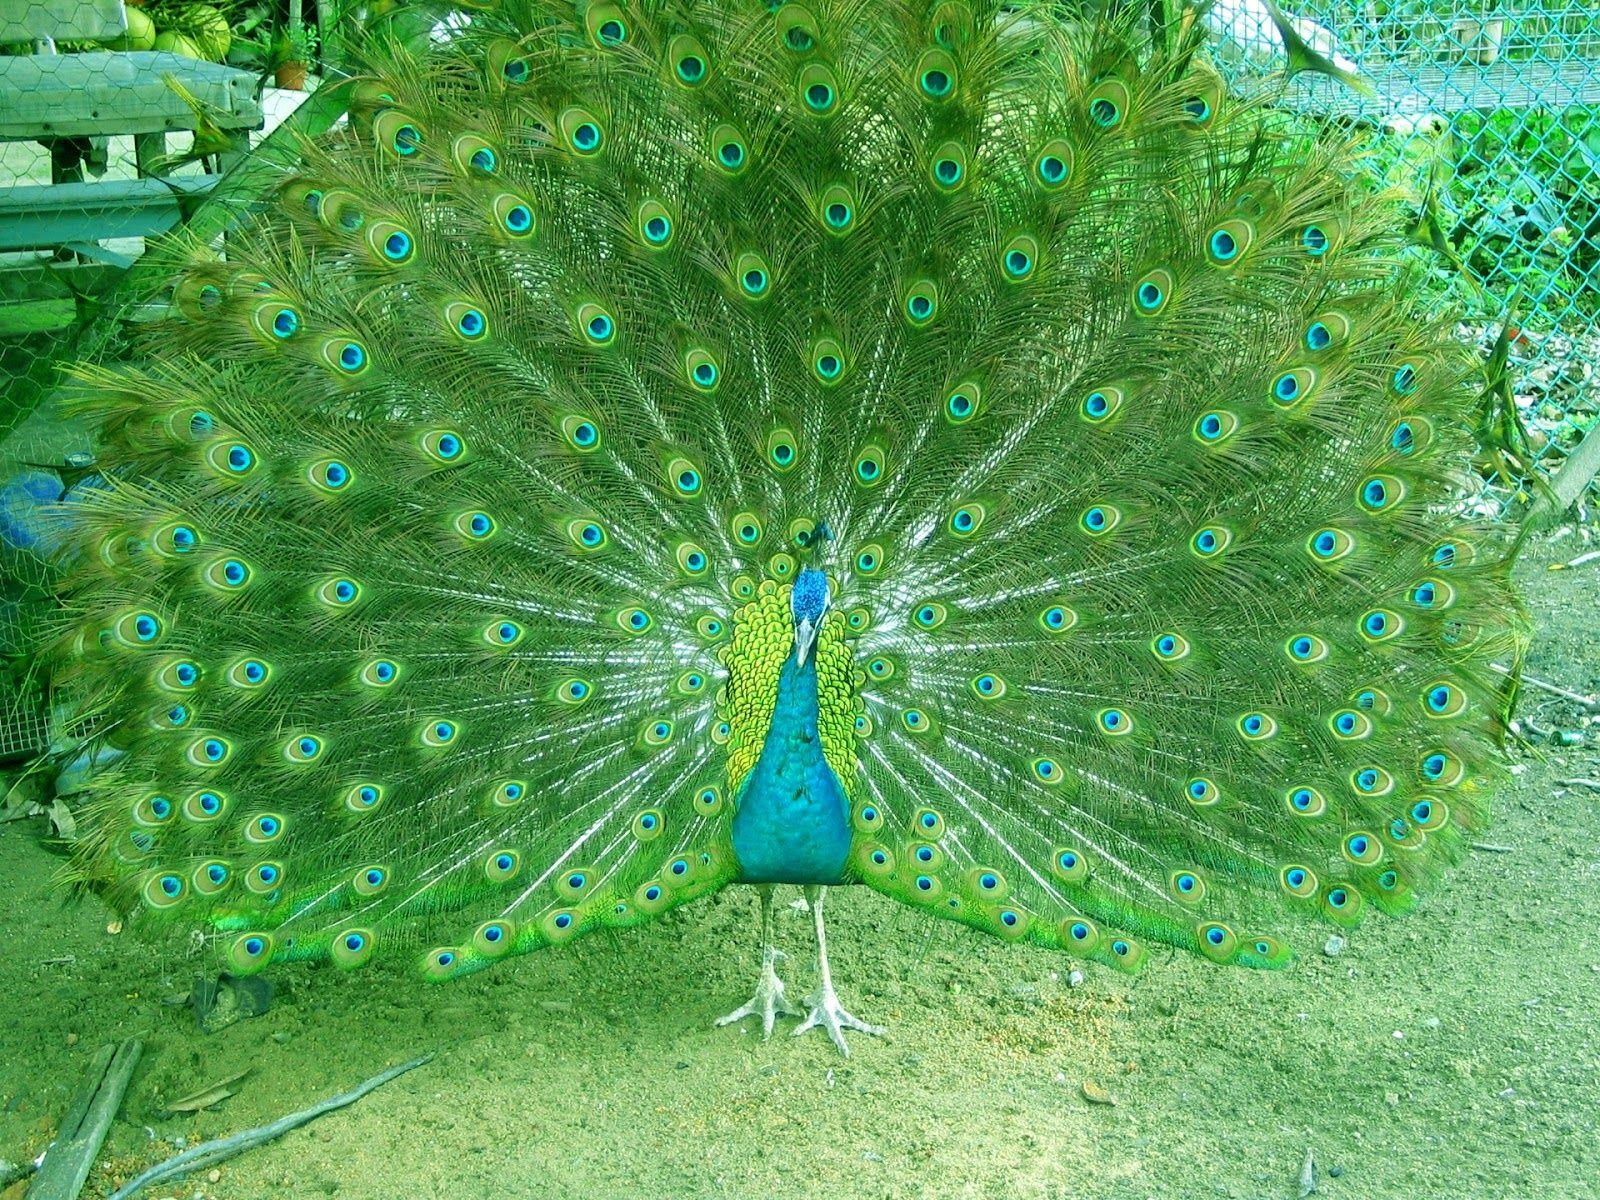 Most Beautiful And Sweet Peacock Wallpaper In HD. Image